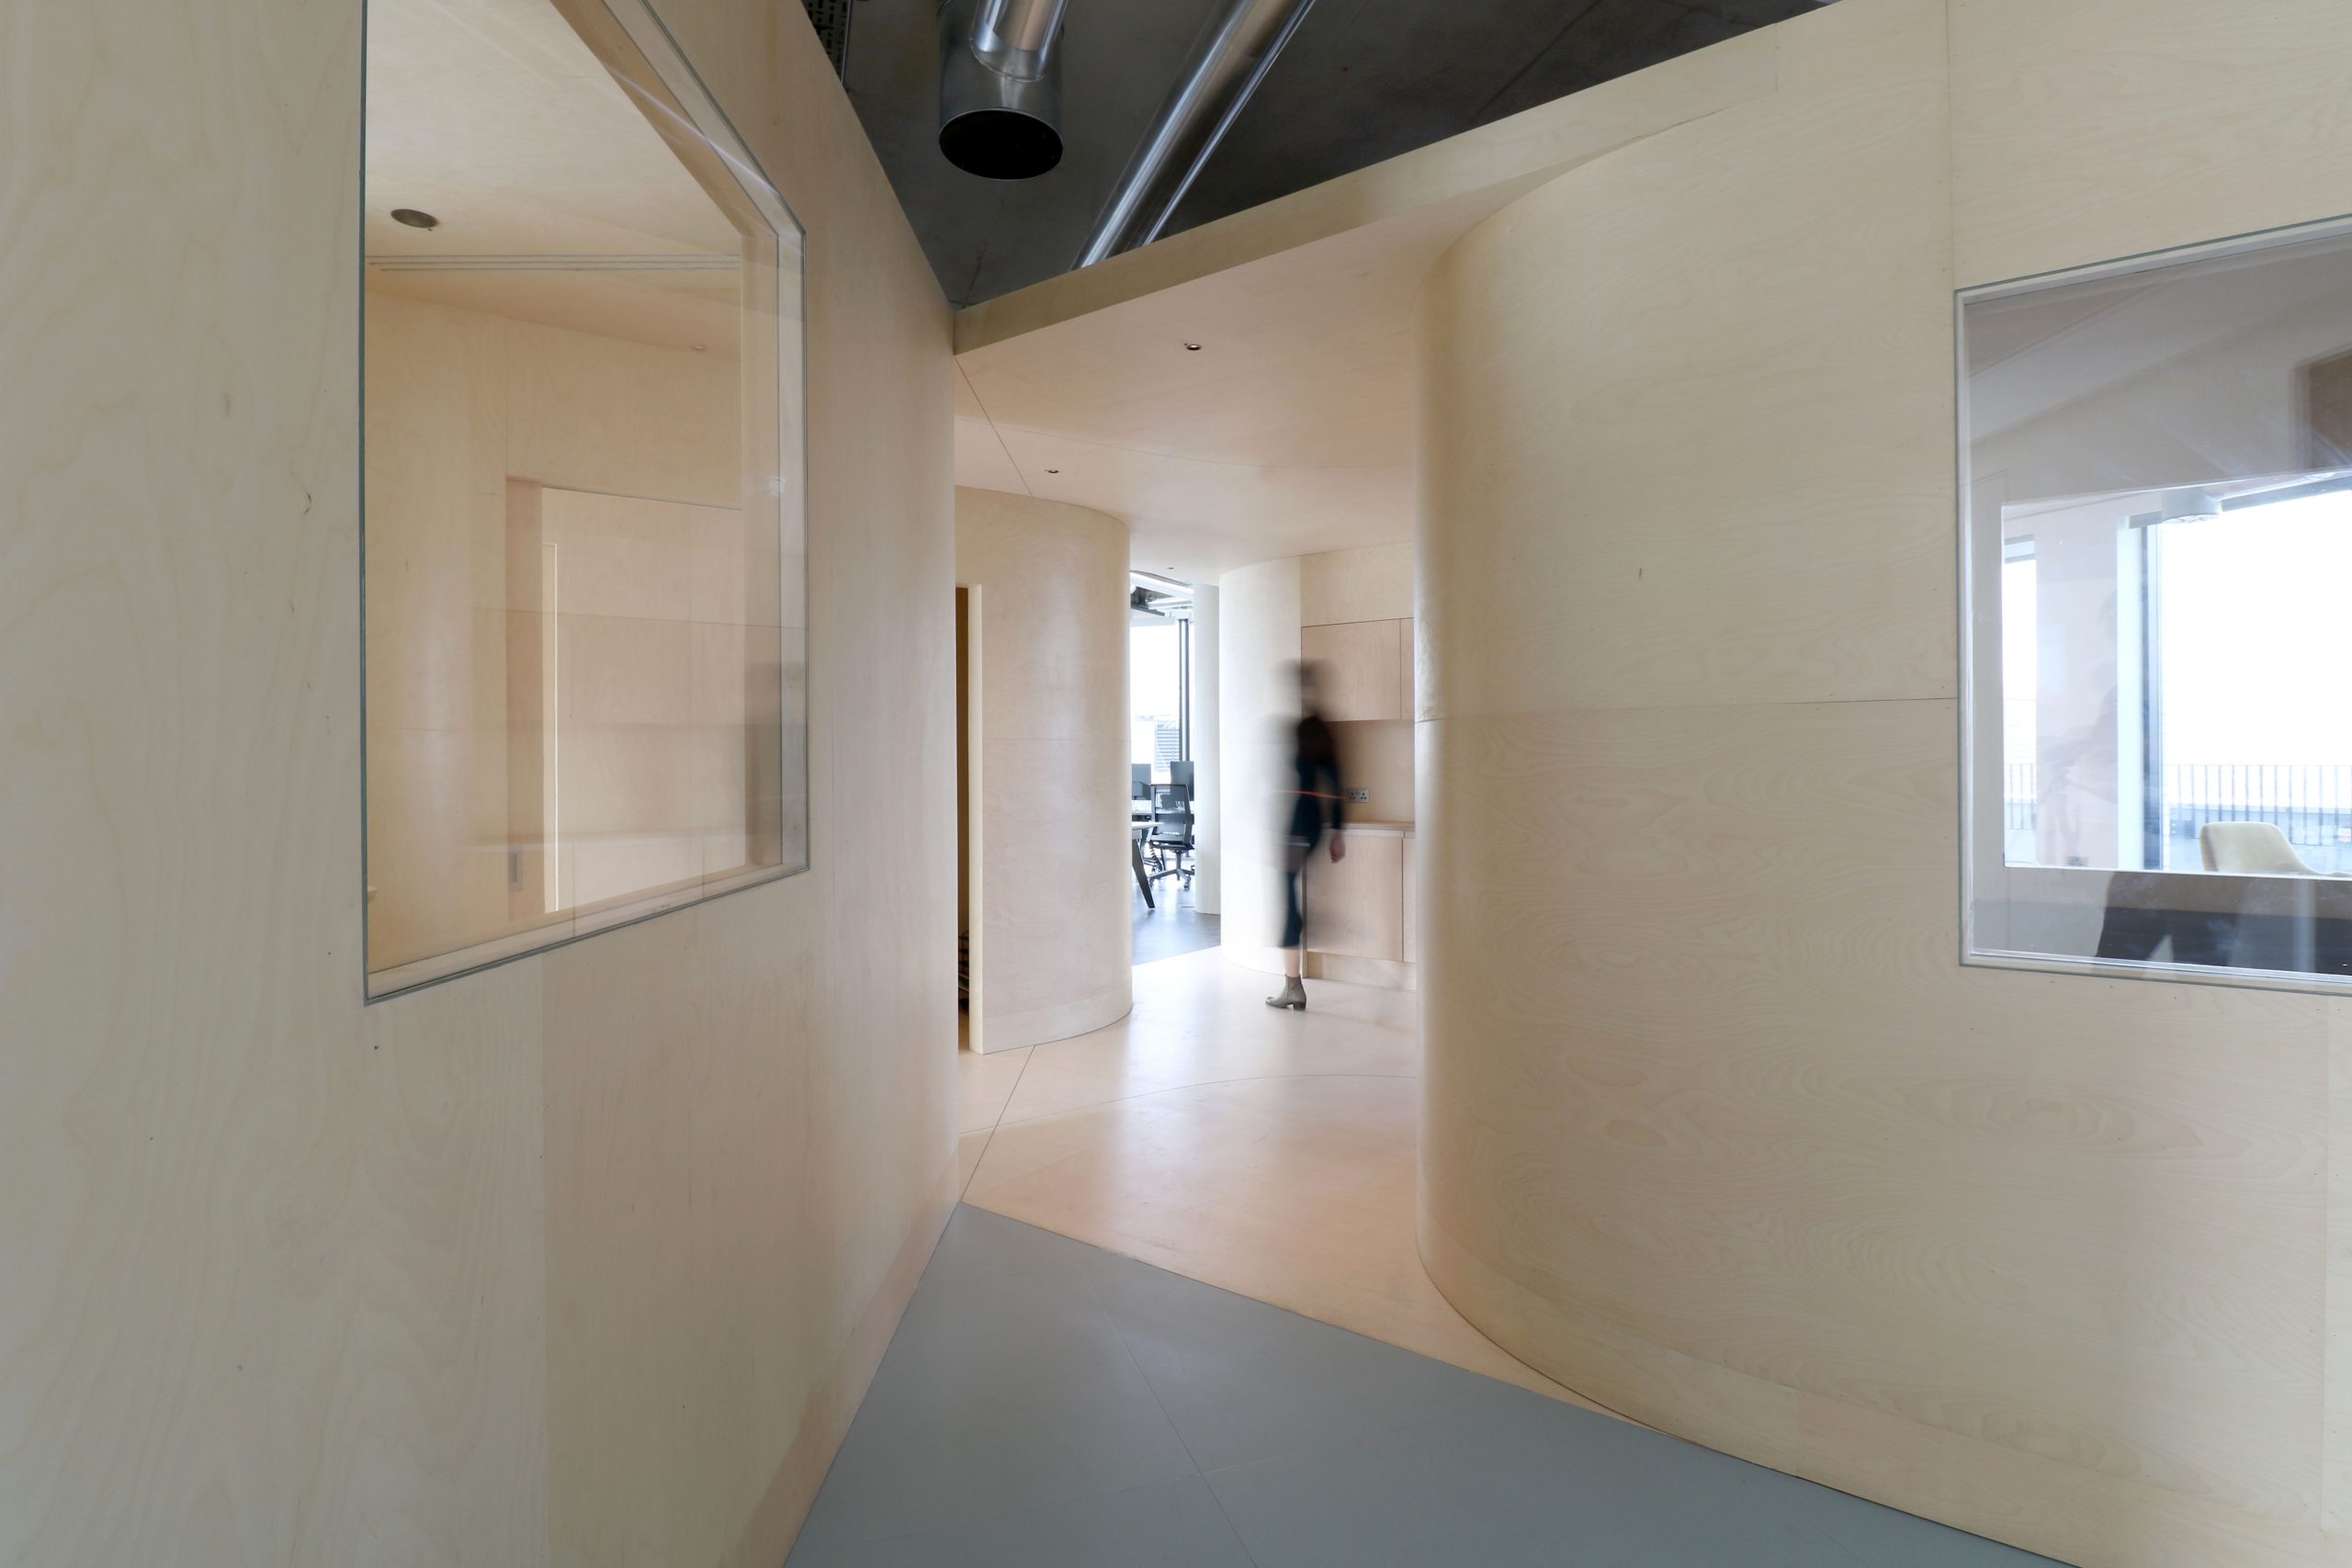 Interior of a plywood-clad office